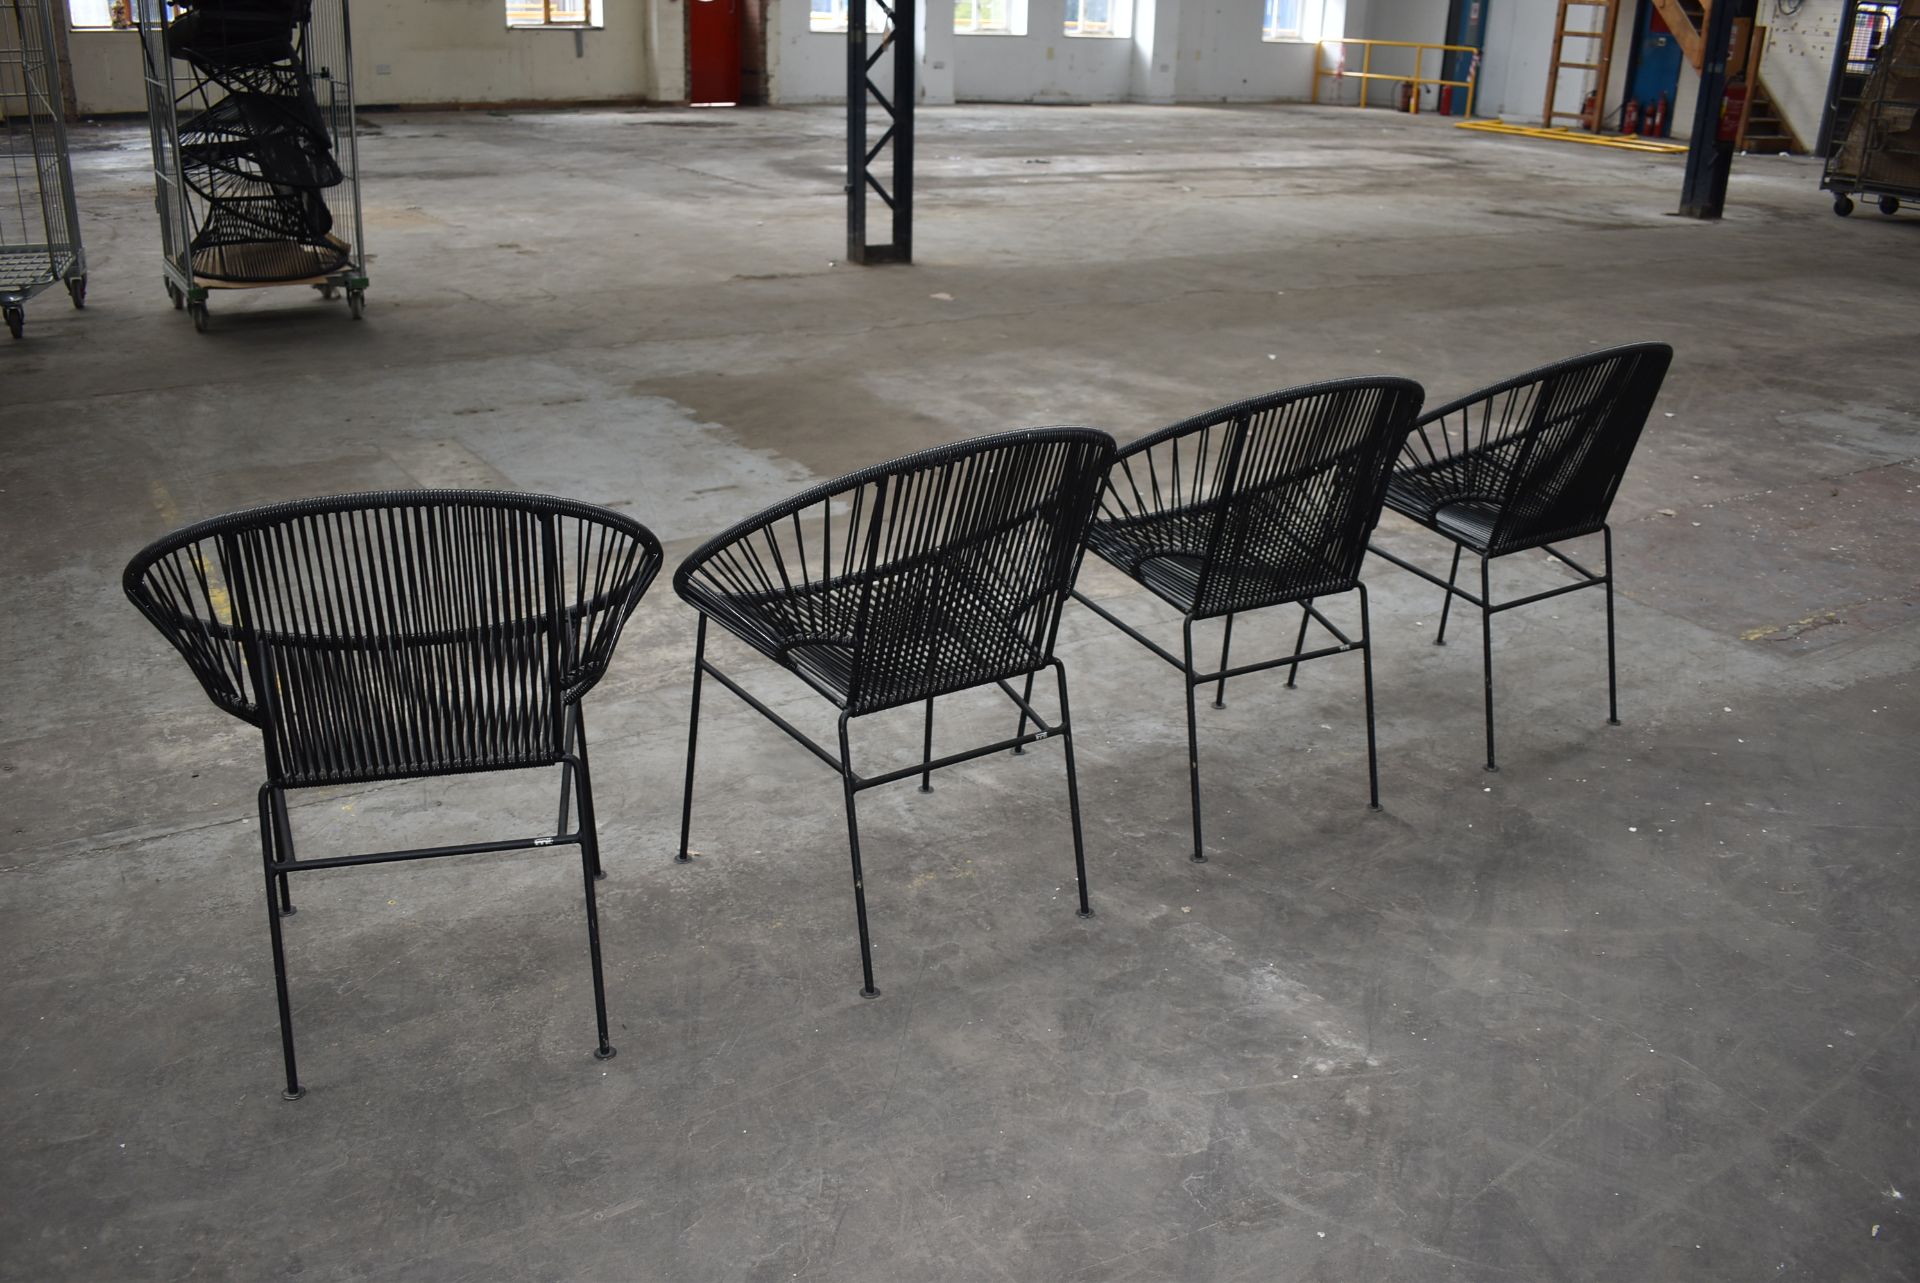 4 x Innit Designer Chairs - Acapulco Style Chairs in Black Suitable For Indoor or Outdoor Use - - Image 7 of 10